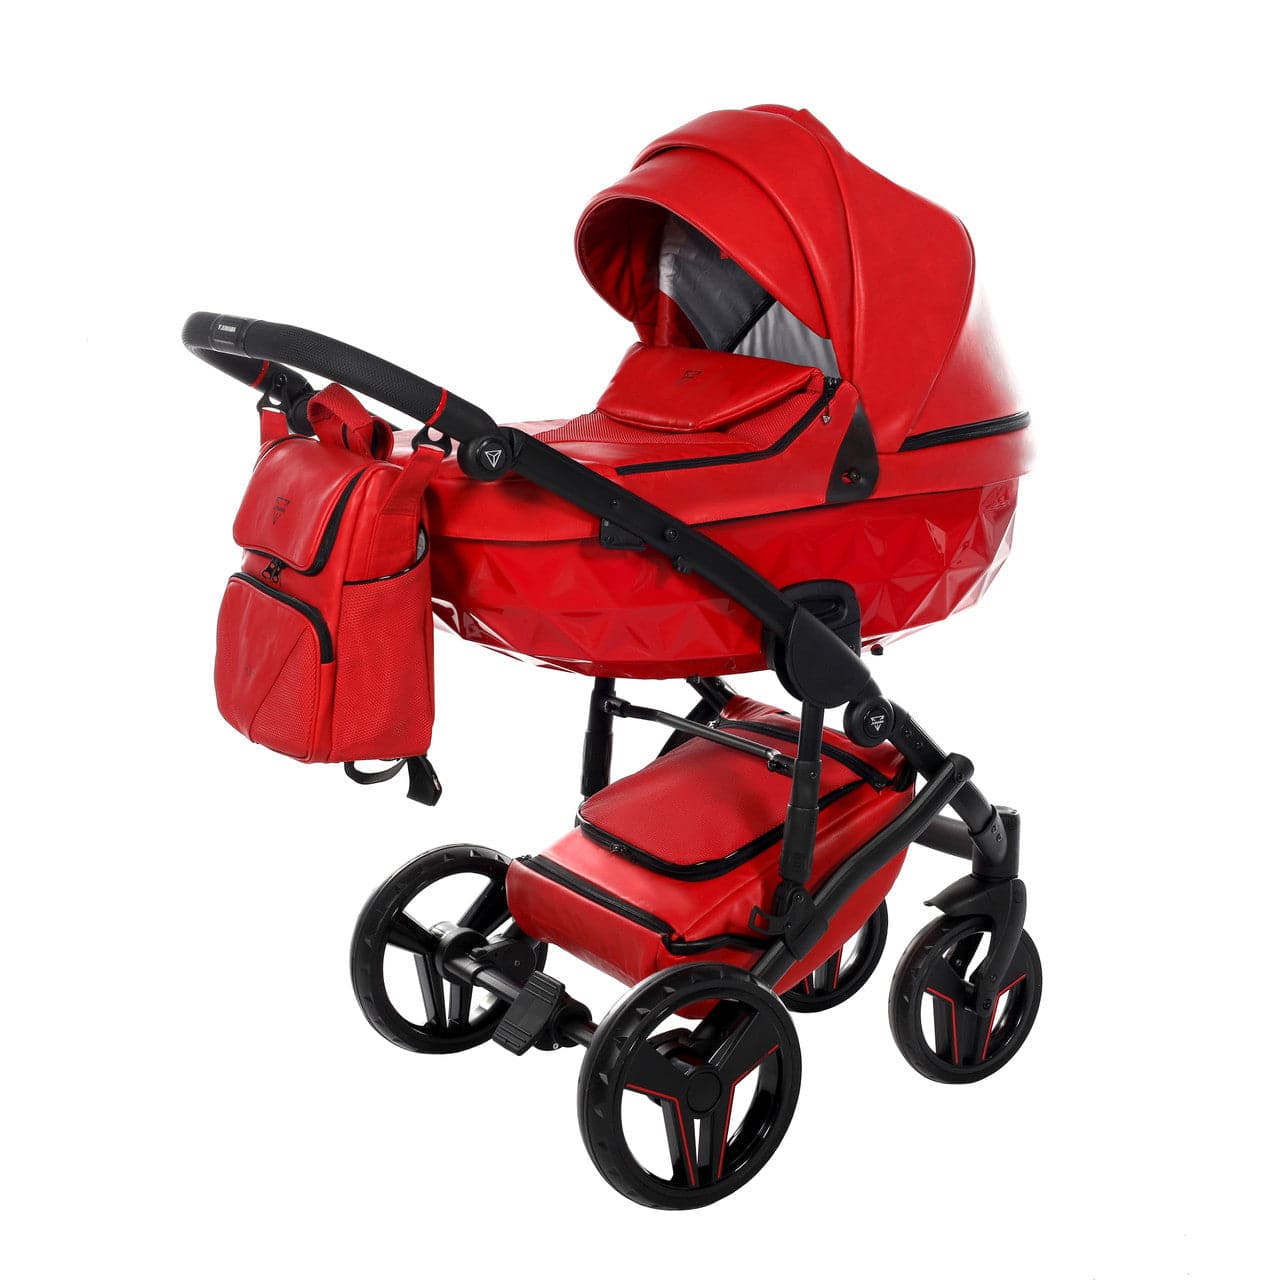 Junama S-Class 2 In 1 Pram - Red -  | For Your Little One